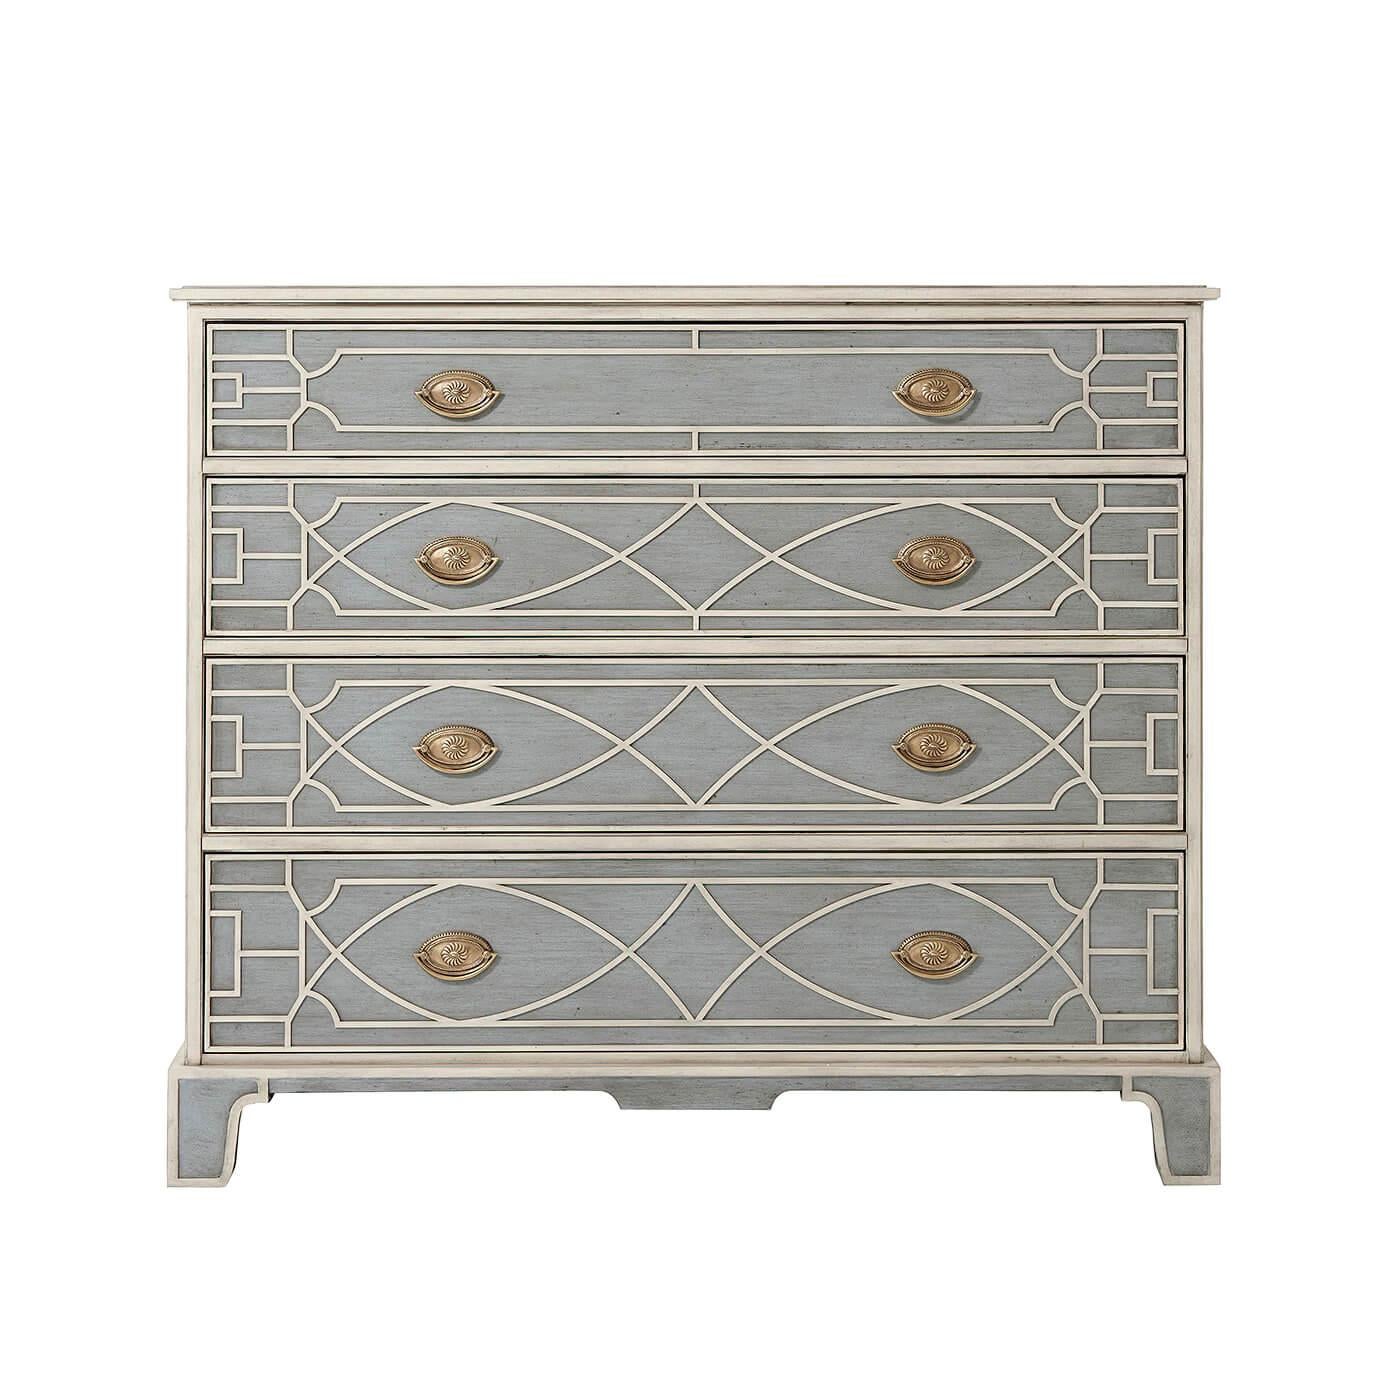 A Chinese Chippendale style painted chest of drawers, the rectangular paneled top, and sides above four blind fret paneled drawers, on similar bracket feet. Inspired by a George III original.

Dimensions: 42